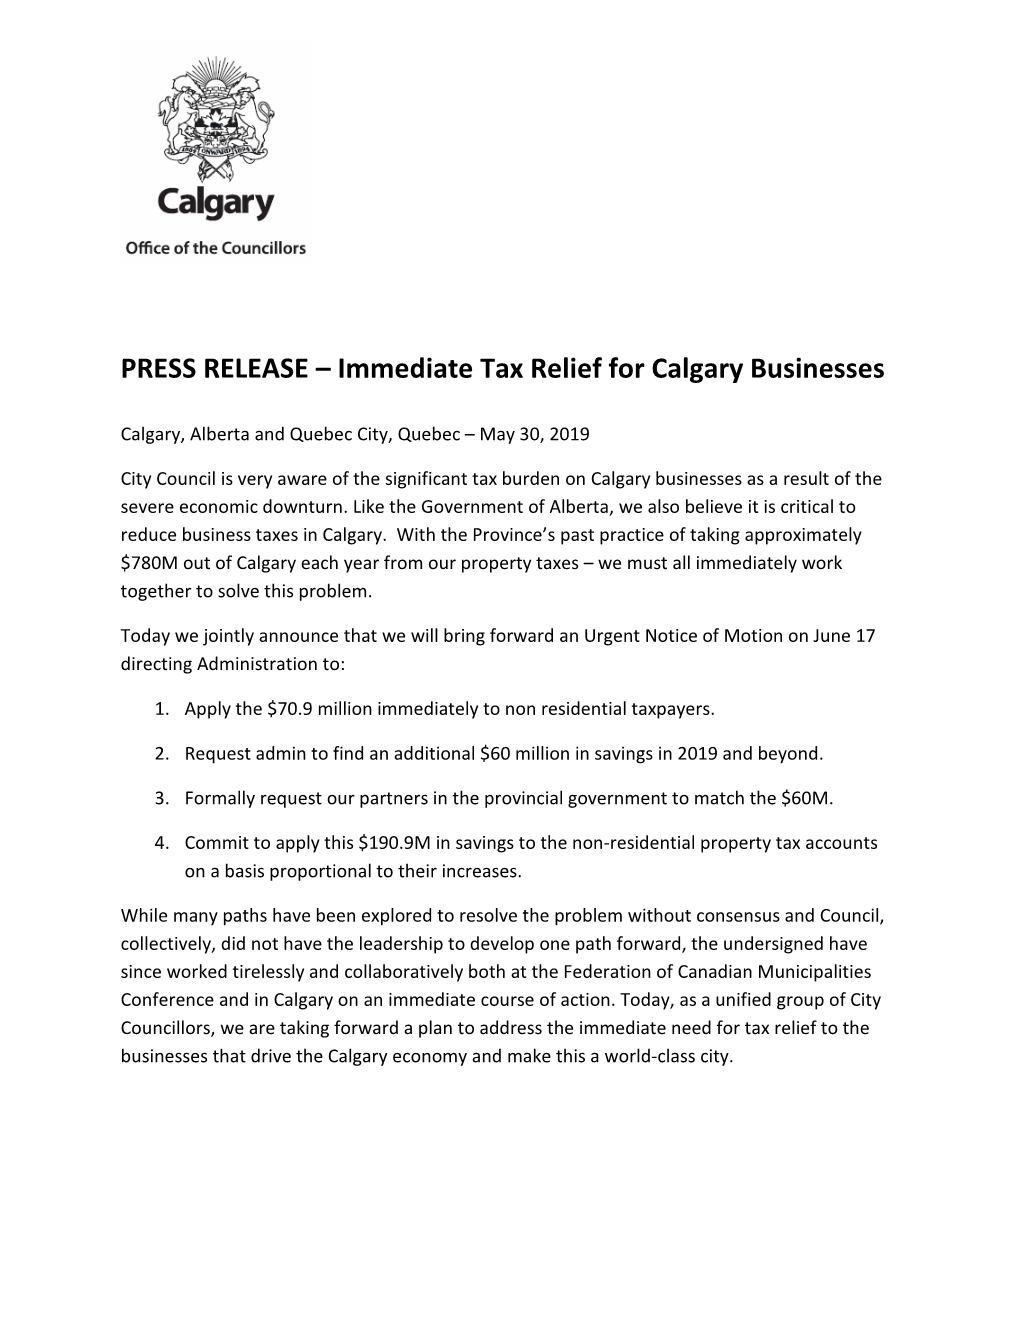 PRESS RELEASE – Immediate Tax Relief for Calgary Businesses